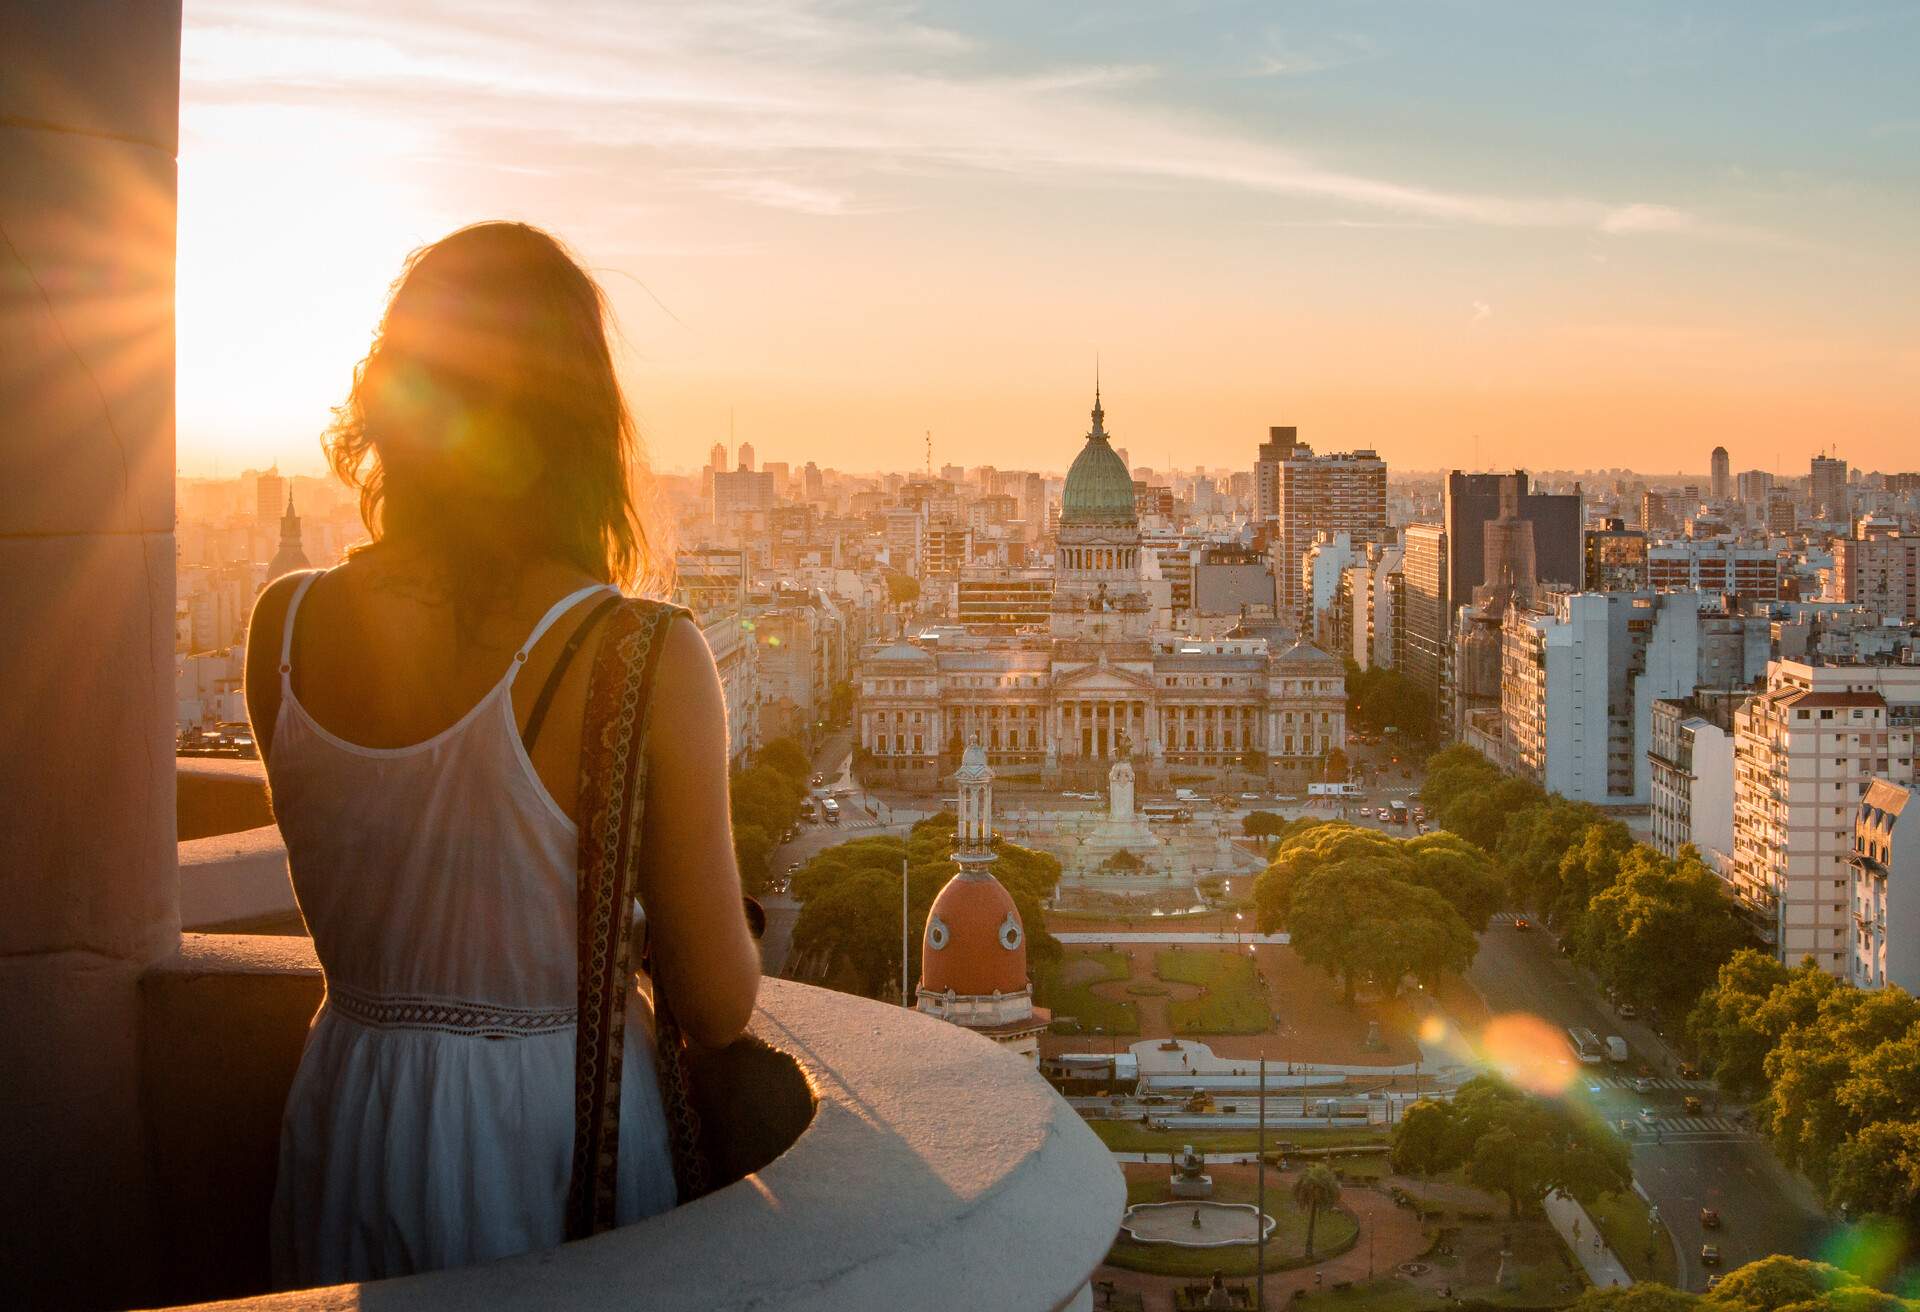 A person stands on a balcony, overlooking the vast cityscape that embraces a serene park below, offering a panoramic view of the dynamic urban landscape.